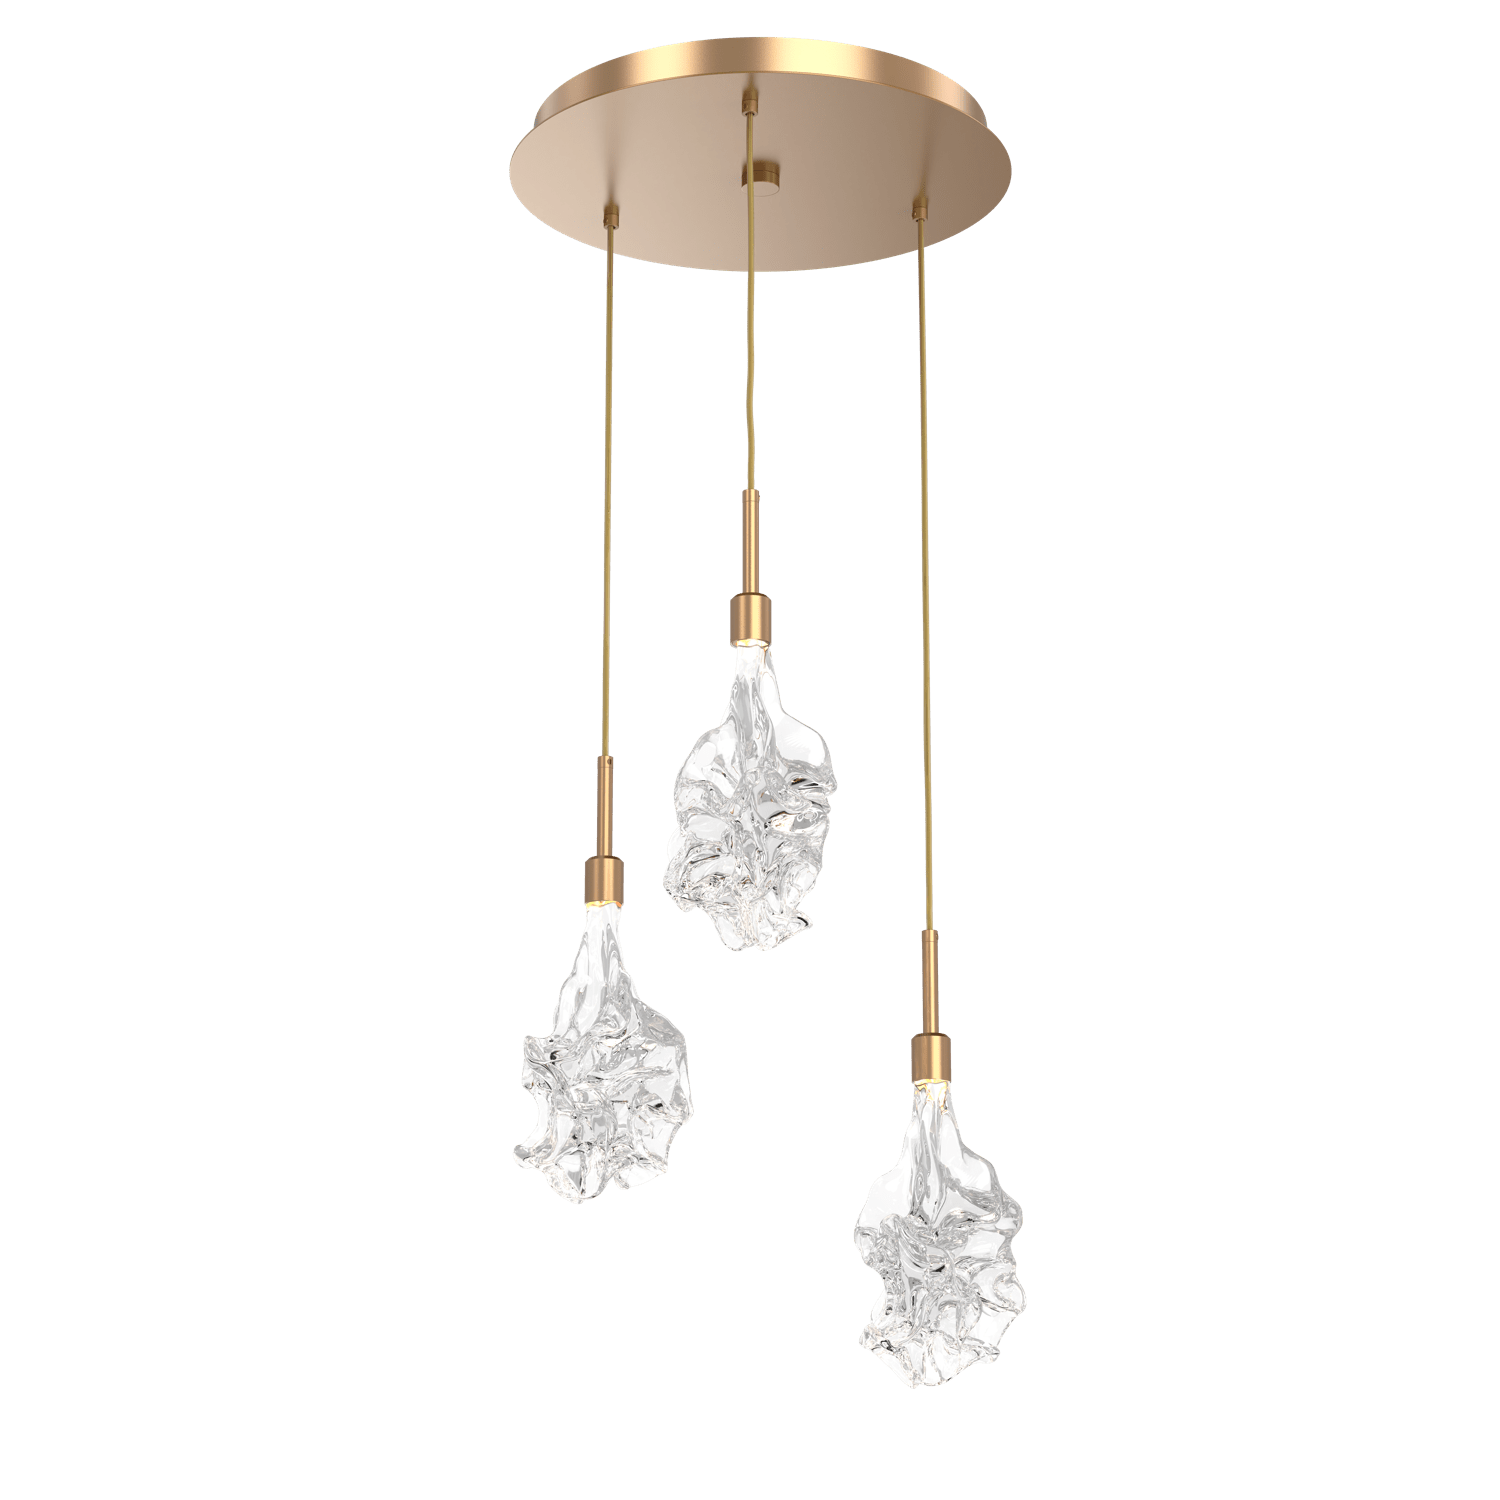 CHB0059-03-NB-Hammerton-Studio-Blossom-3-light-round-pendant-chandelier-with-novel-brass-finish-and-clear-handblown-crystal-glass-shades-and-LED-lamping